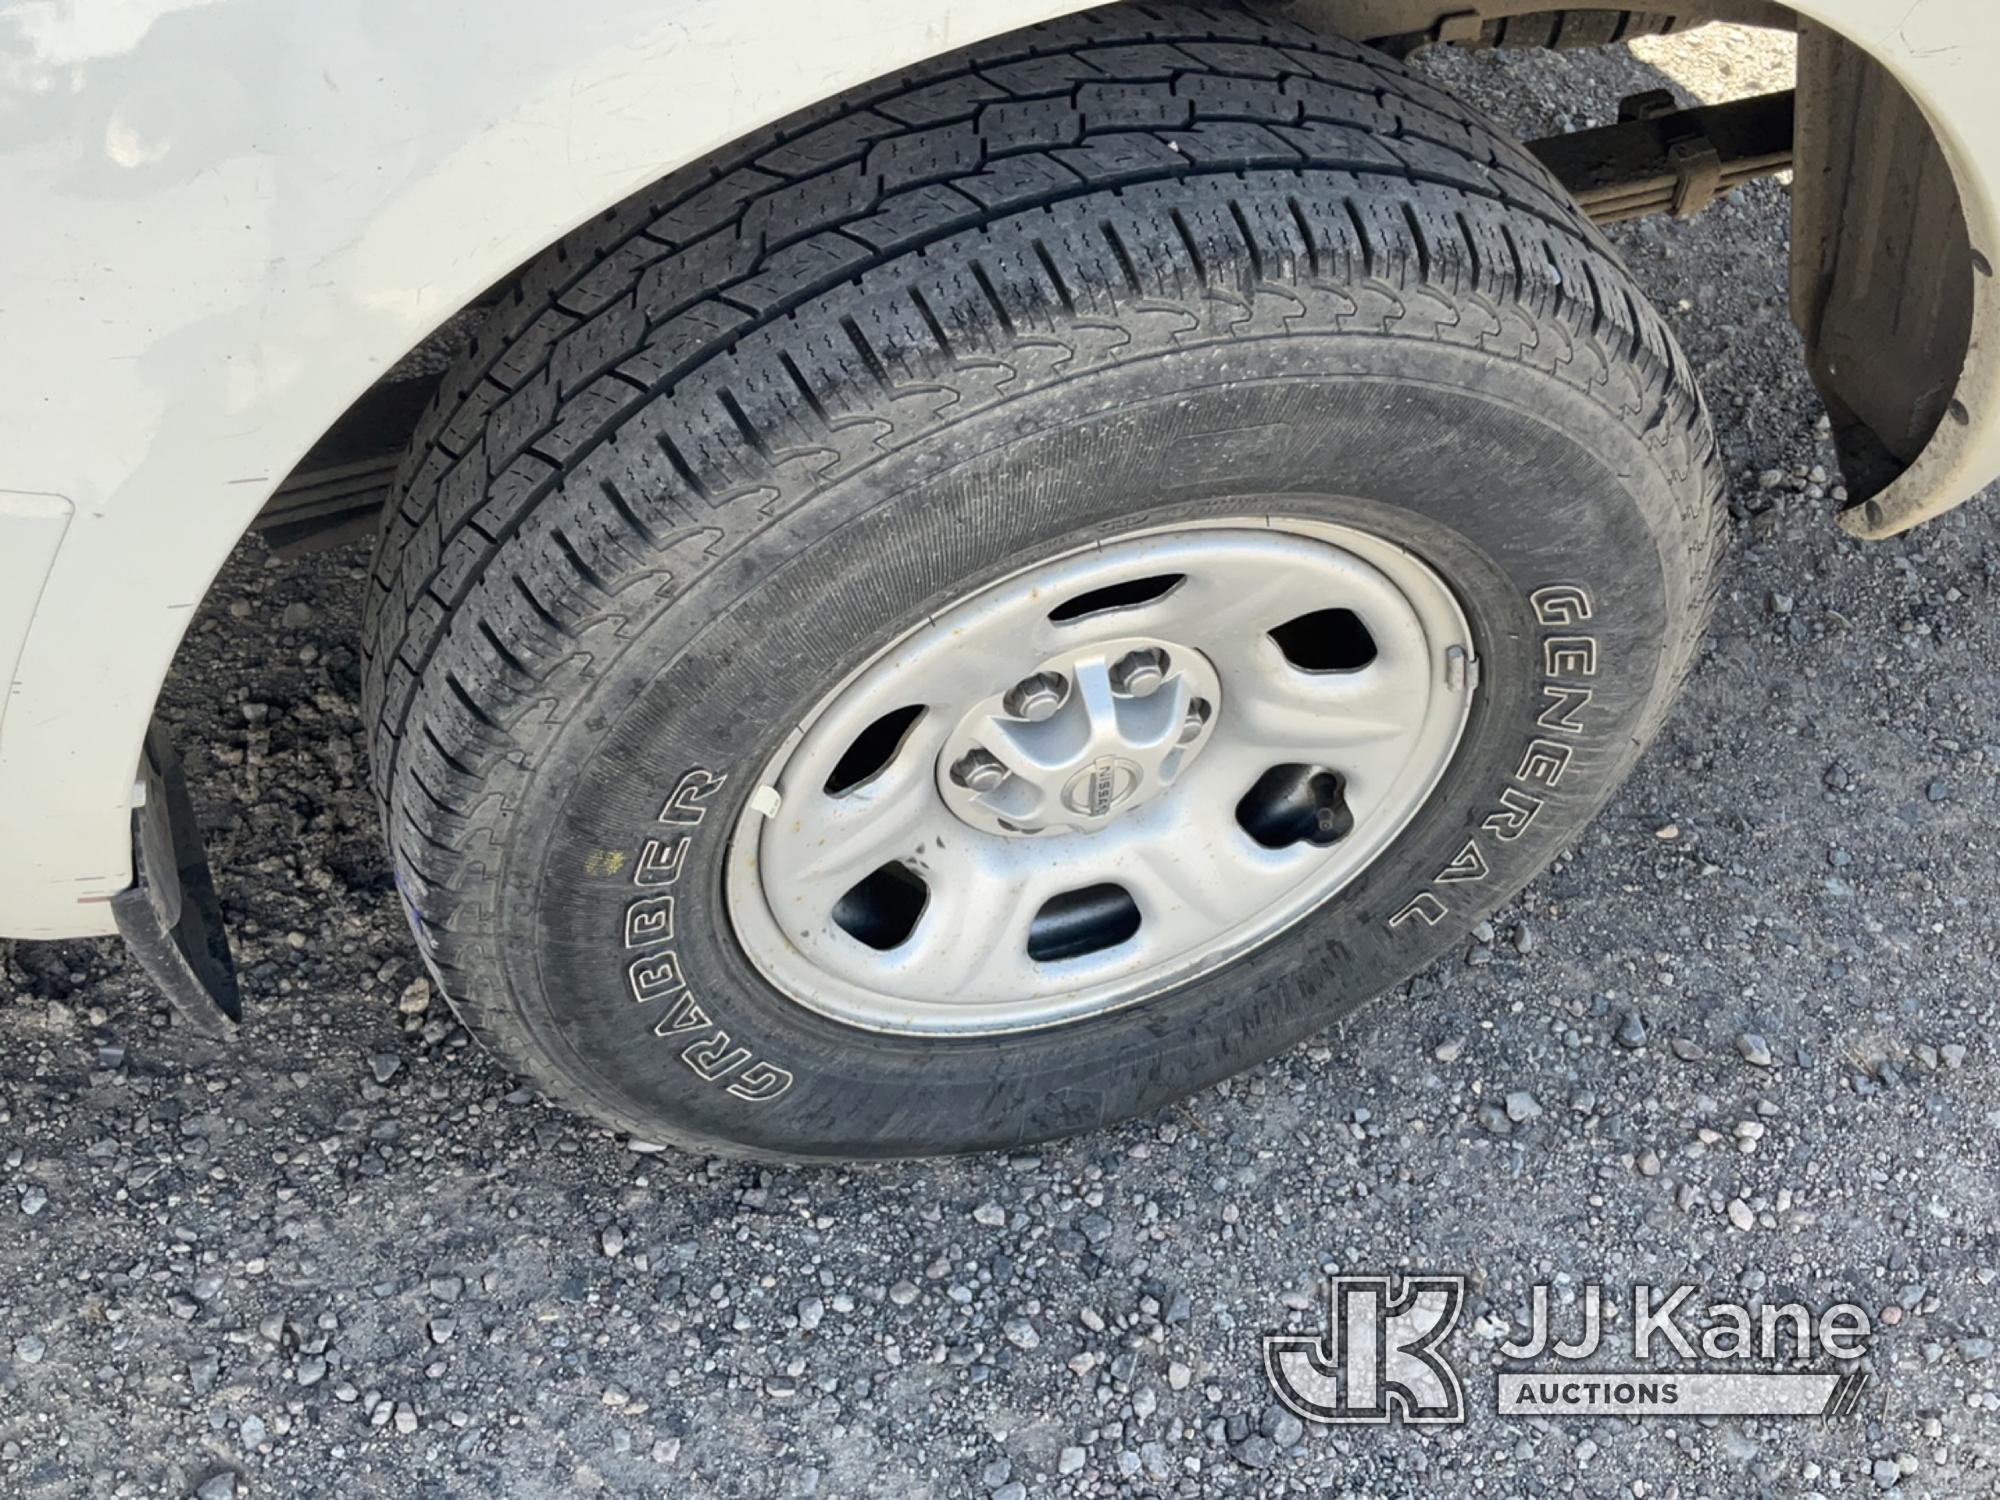 (McCarran, NV) 2015 Nissan Frontier Extended-Cab Pickup Truck Runs & Moves) (Tire Pressure Light On